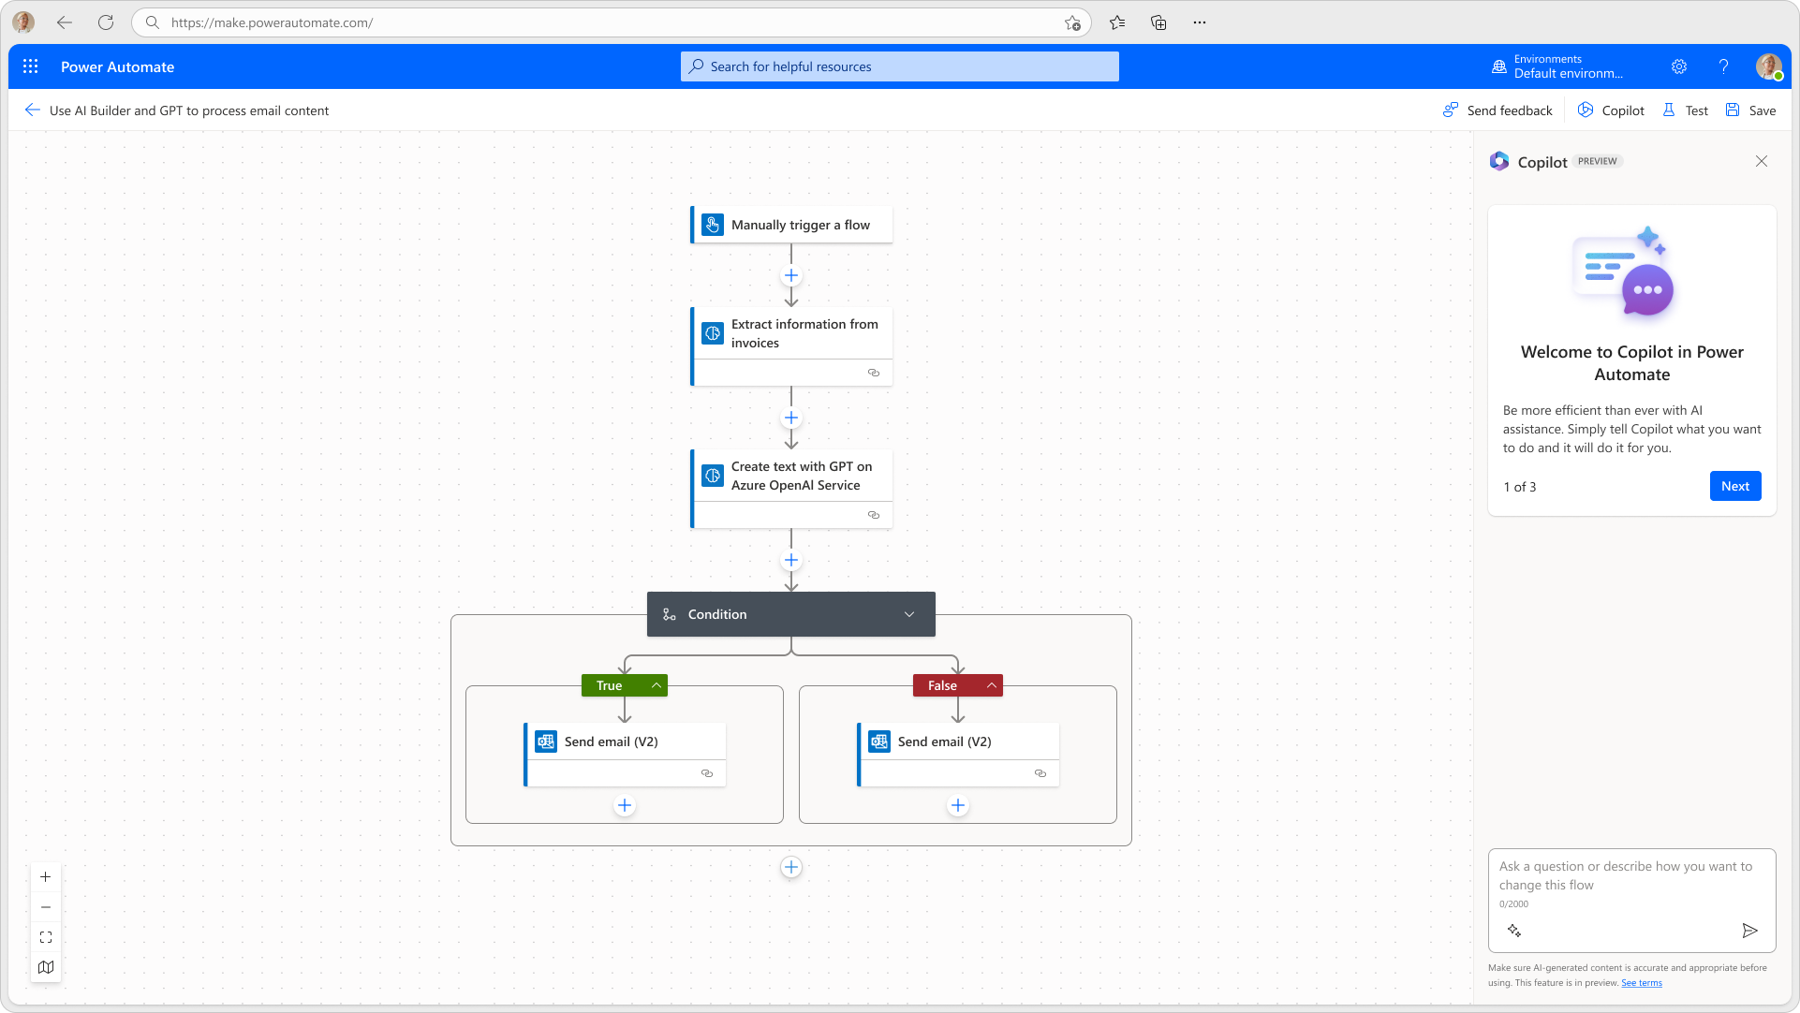 Screenshot of using Copilot to manually trigger a flow, extract information from invoices, and create text with GPT on Azure OpenAI.